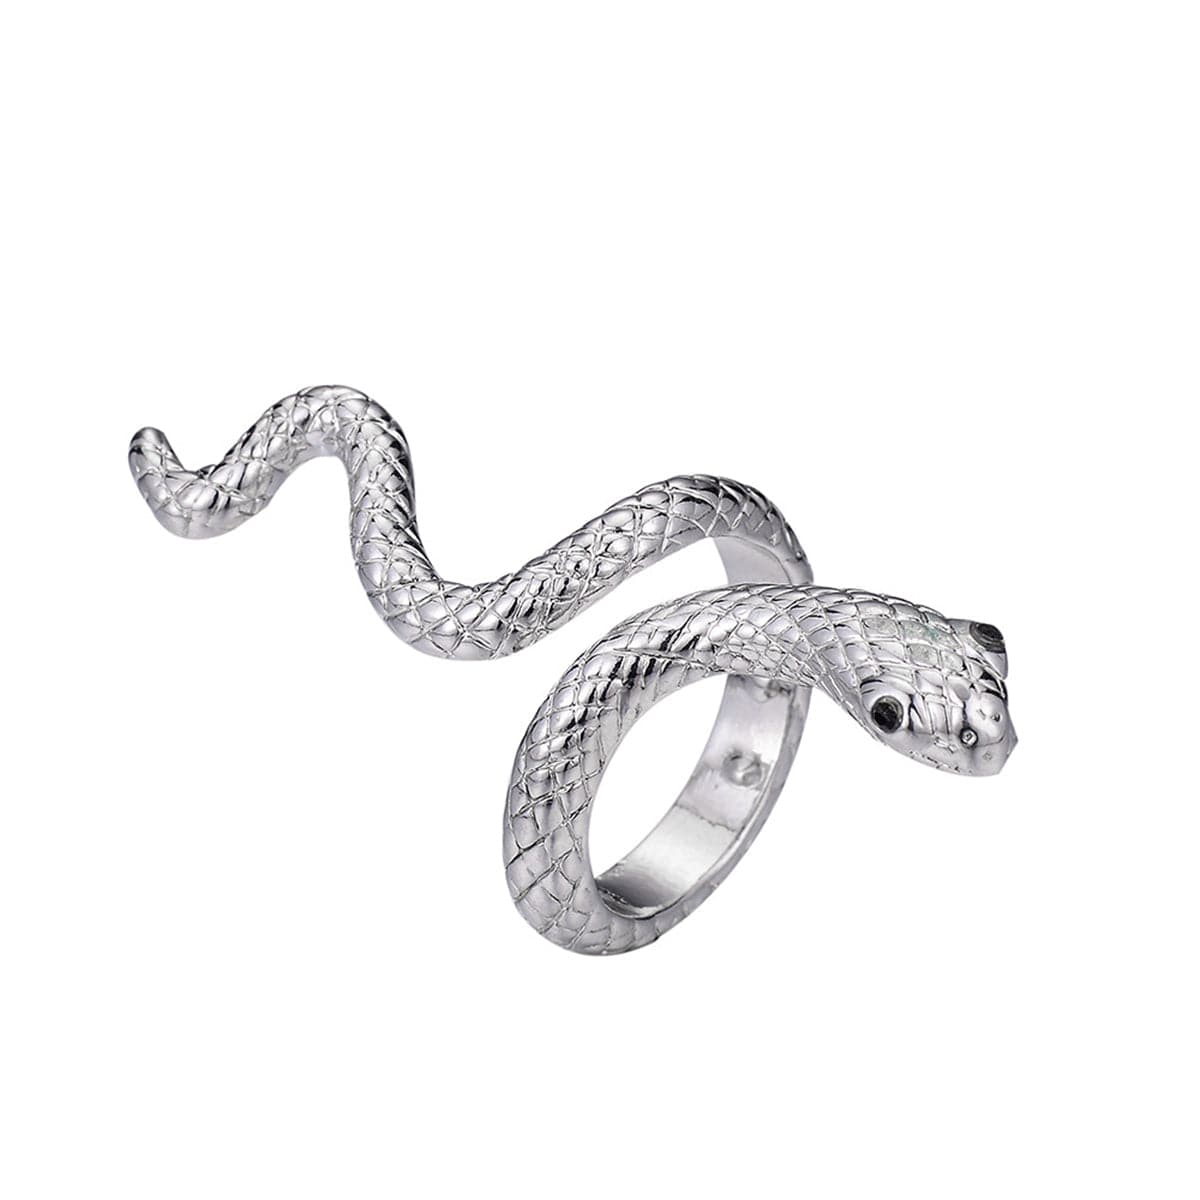 Silver-Plated Snake Bypass Ring